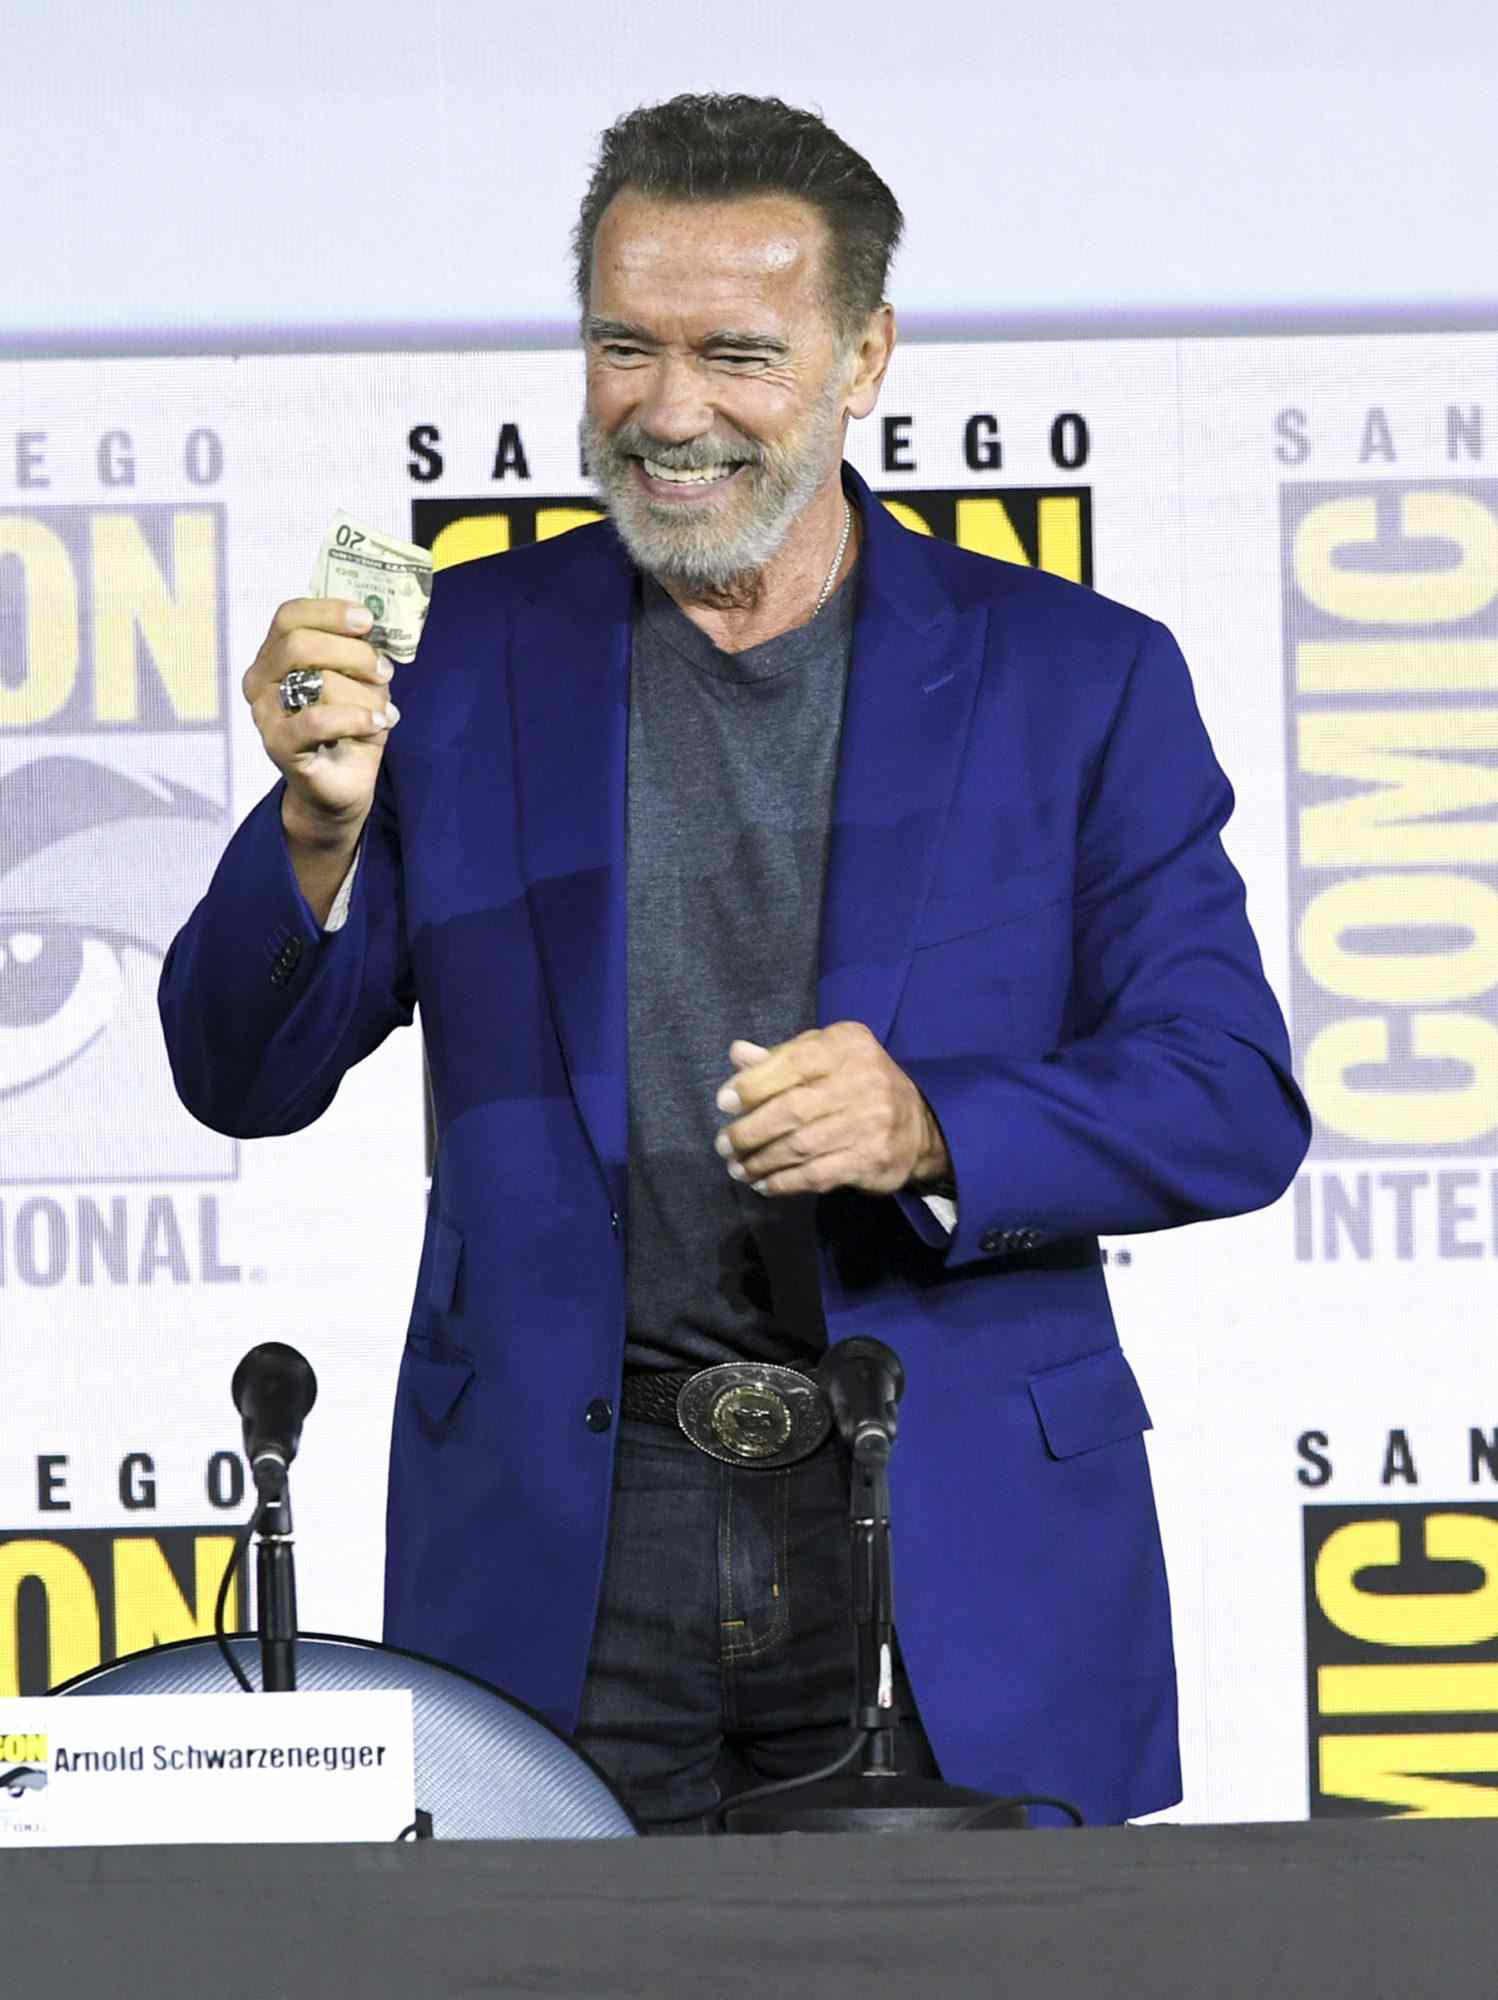 SAN DIEGO, CALIFORNIA - JULY 18: Arnold Schwarzenegger speaks at the "Terminator: Dark Fate" panel during 2019 Comic-Con International at San Diego Convention Center on July 18, 2019 in San Diego, California. (Photo by Kevin Winter/Getty Images)